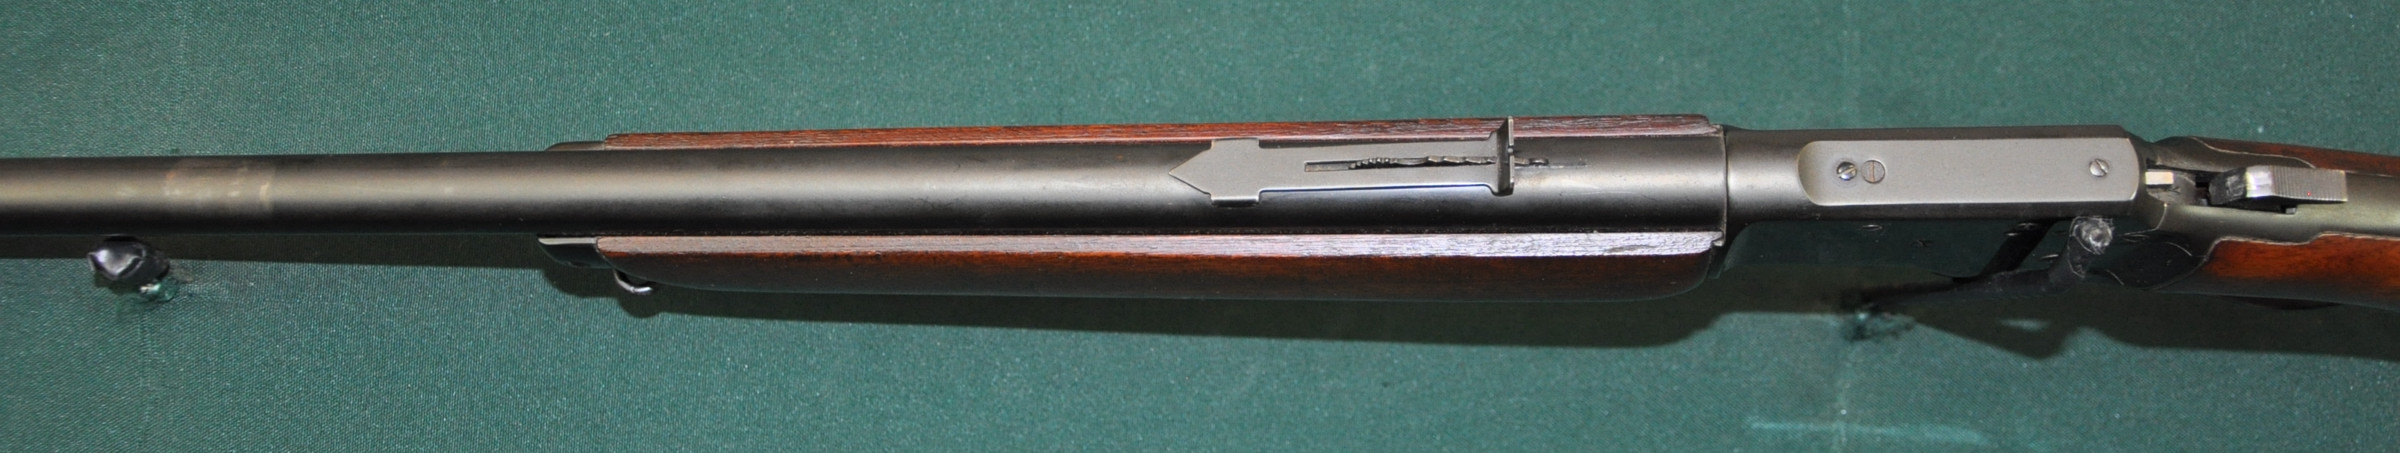 Marlin Model 39a 22lr Lever Action Rifle For Sale At